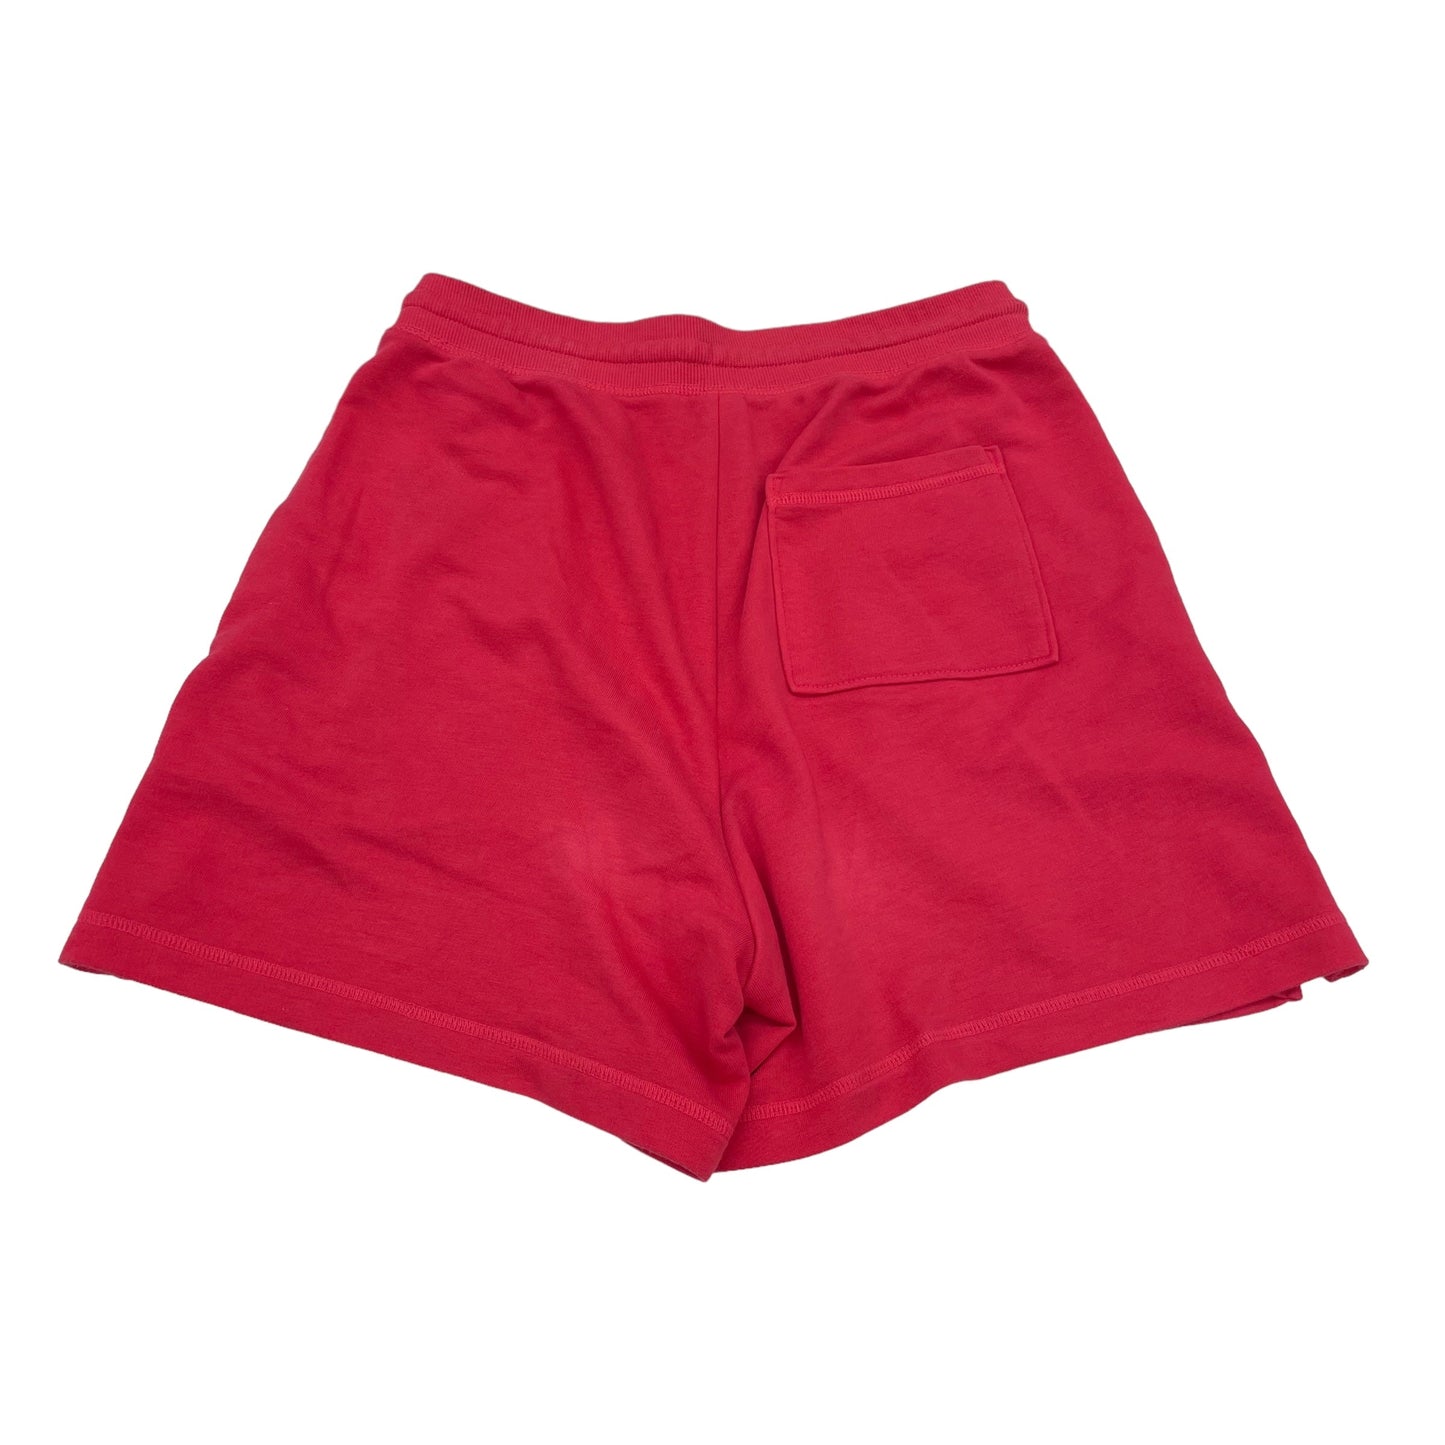 PINK OLD NAVY SHORTS, Size S